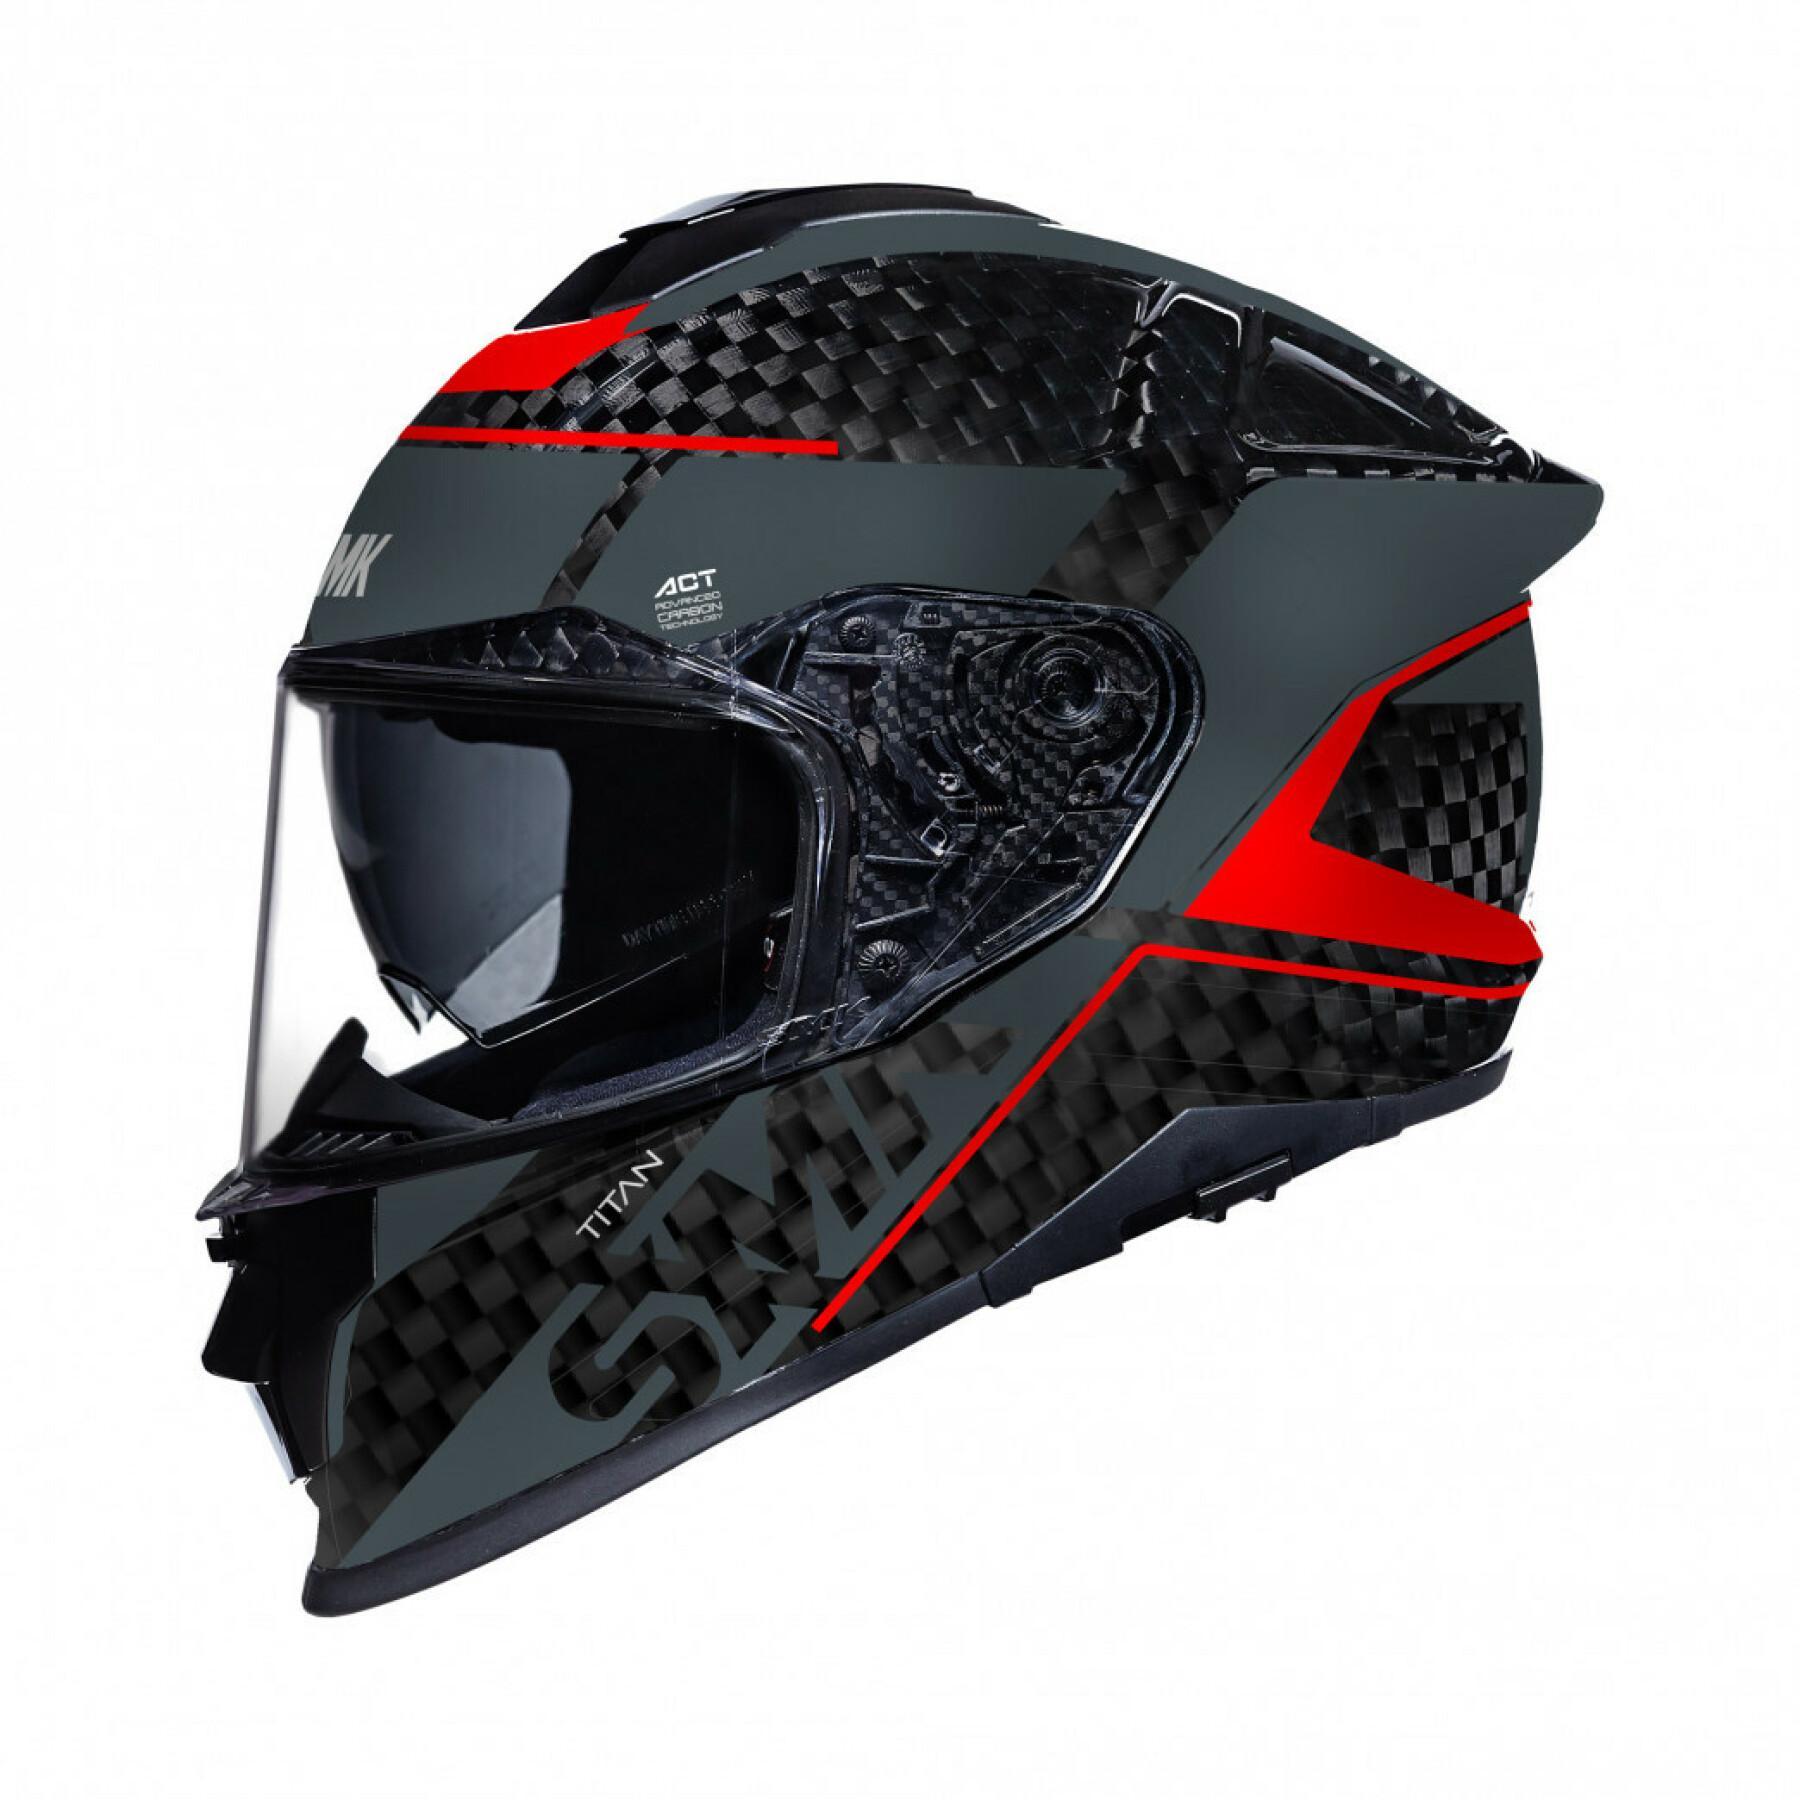 Full face motorcycle helmet in titanium and carbon SMK